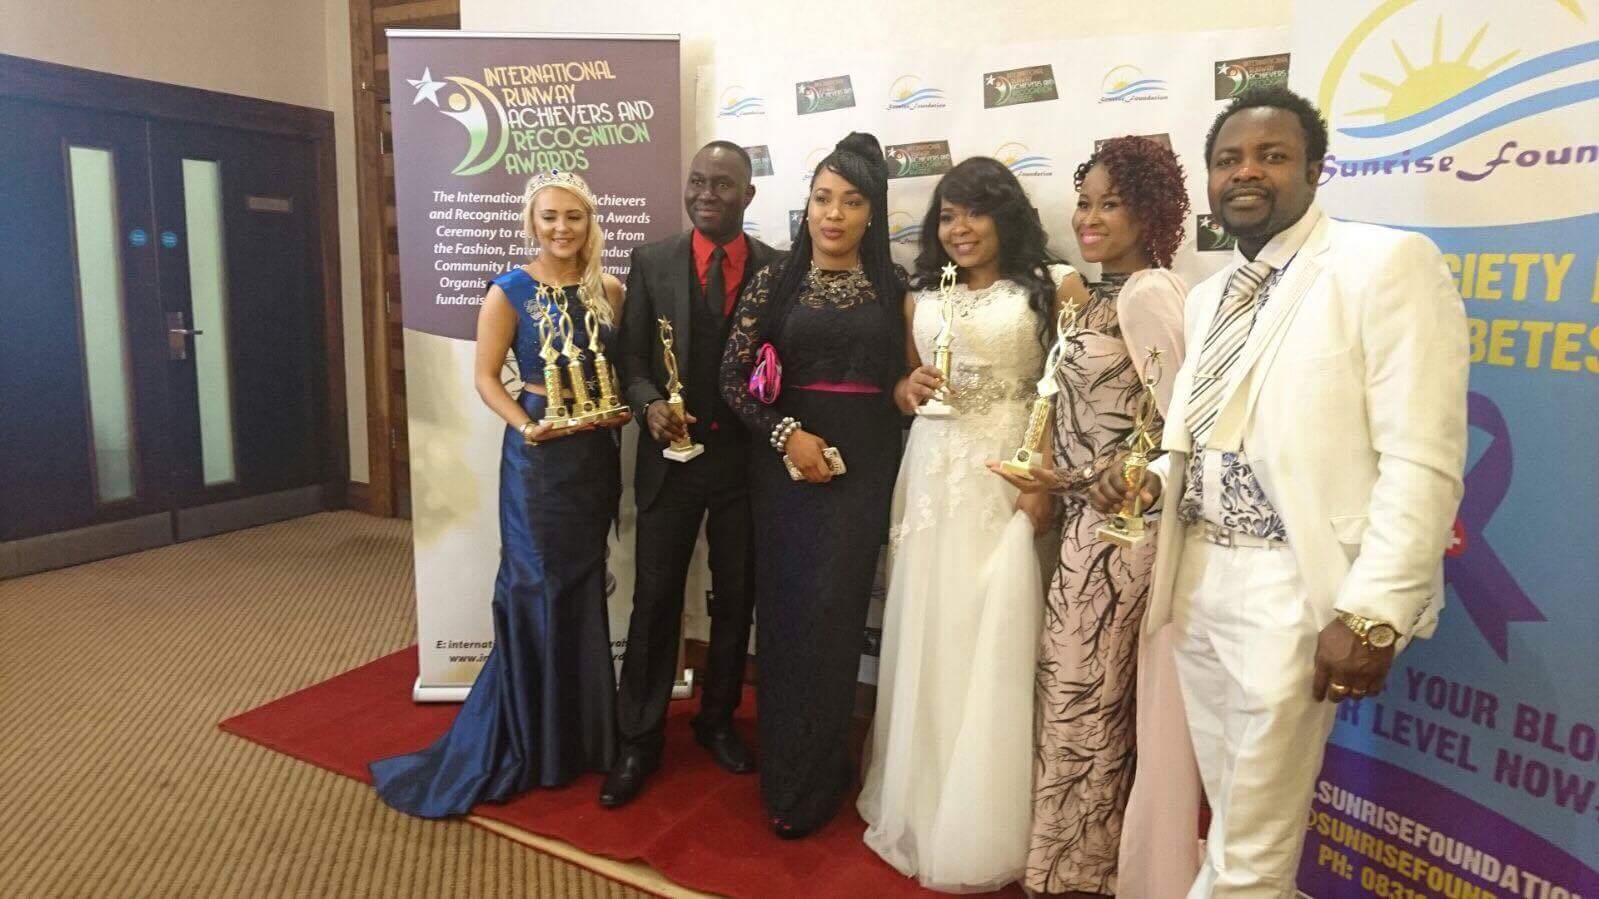 International Runway Achievers and Recognition Awards 2017